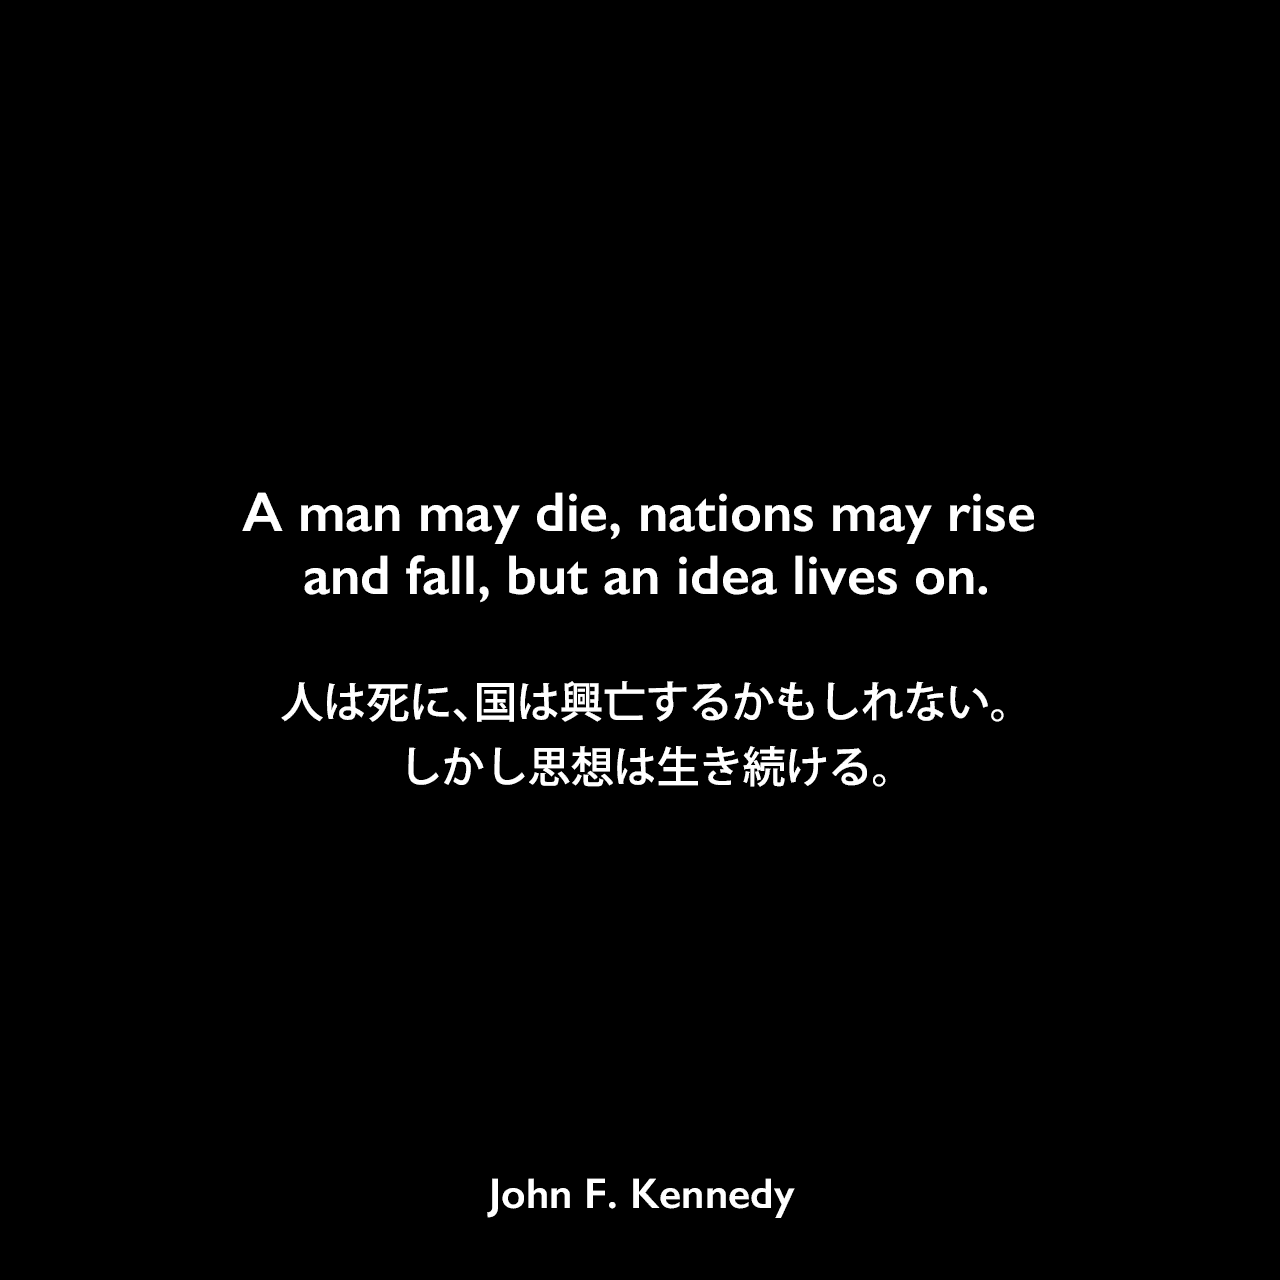 A man may die, nations may rise and fall, but an idea lives on.人は死に、国は興亡するかもしれない。しかし思想は生き続ける。John F Kennedy